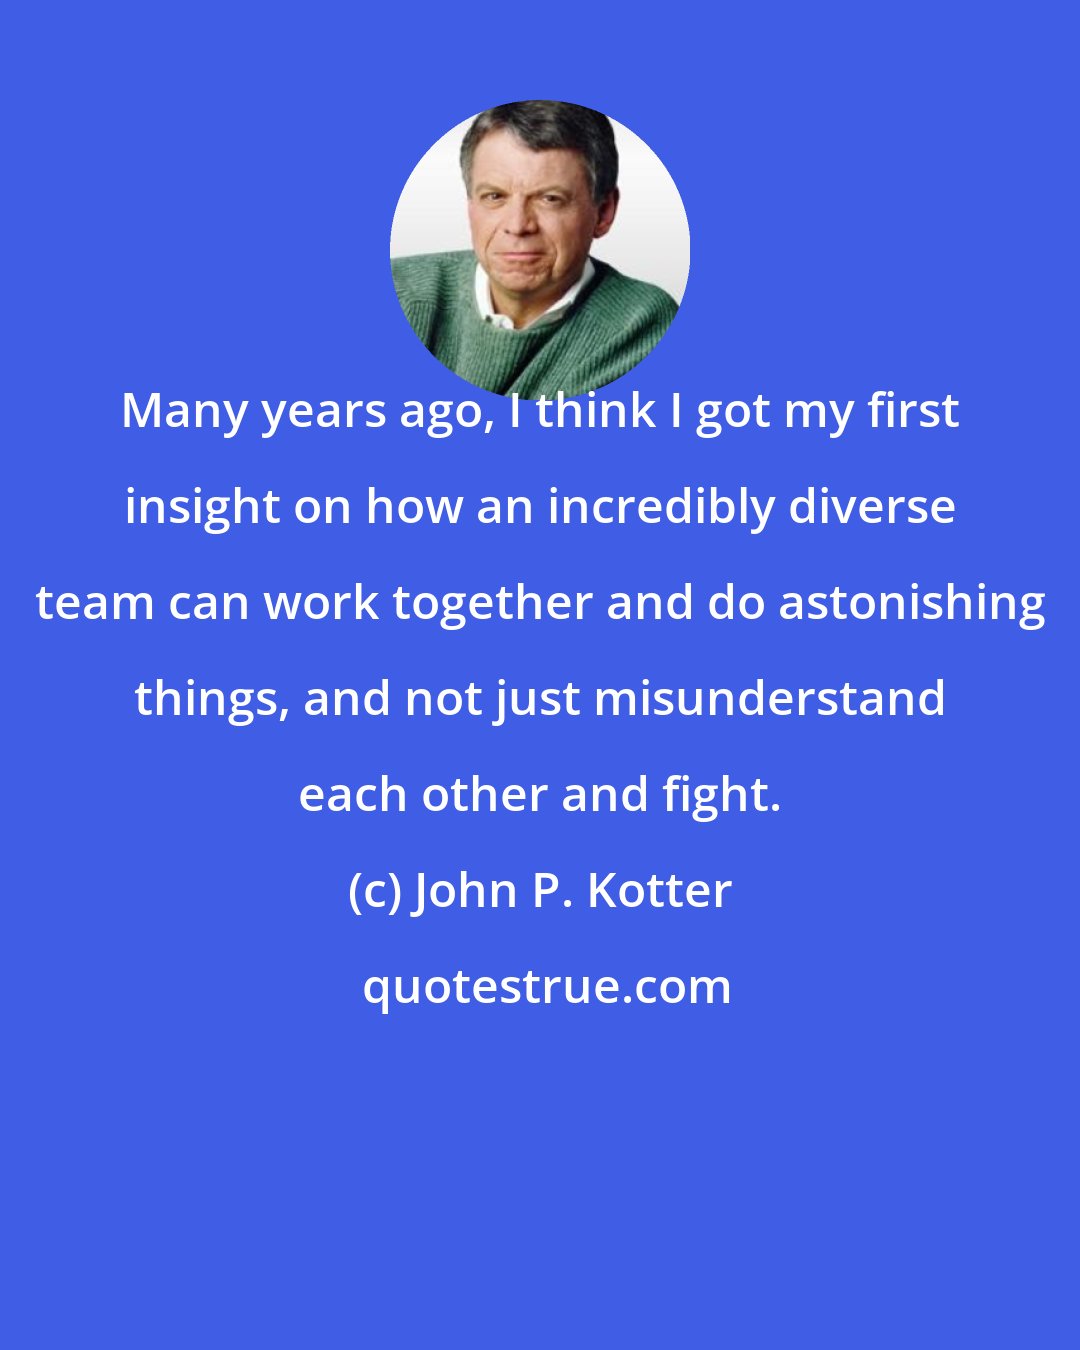 John P. Kotter: Many years ago, I think I got my first insight on how an incredibly diverse team can work together and do astonishing things, and not just misunderstand each other and fight.